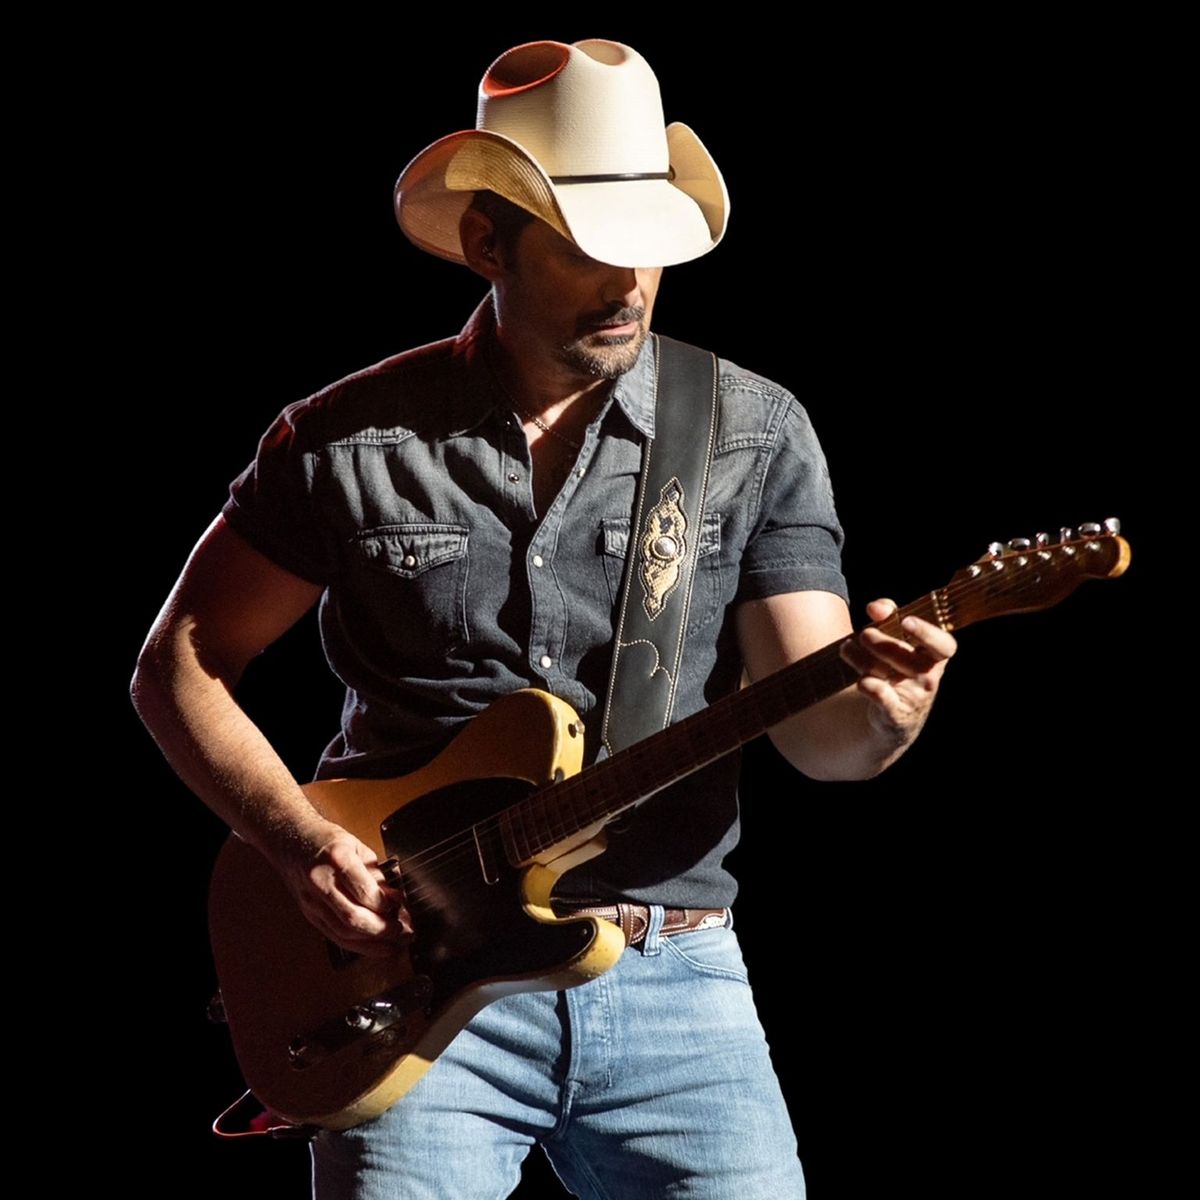 Brad Paisley (Photo by Timothy Hiele/provided by Schmidt Relations)